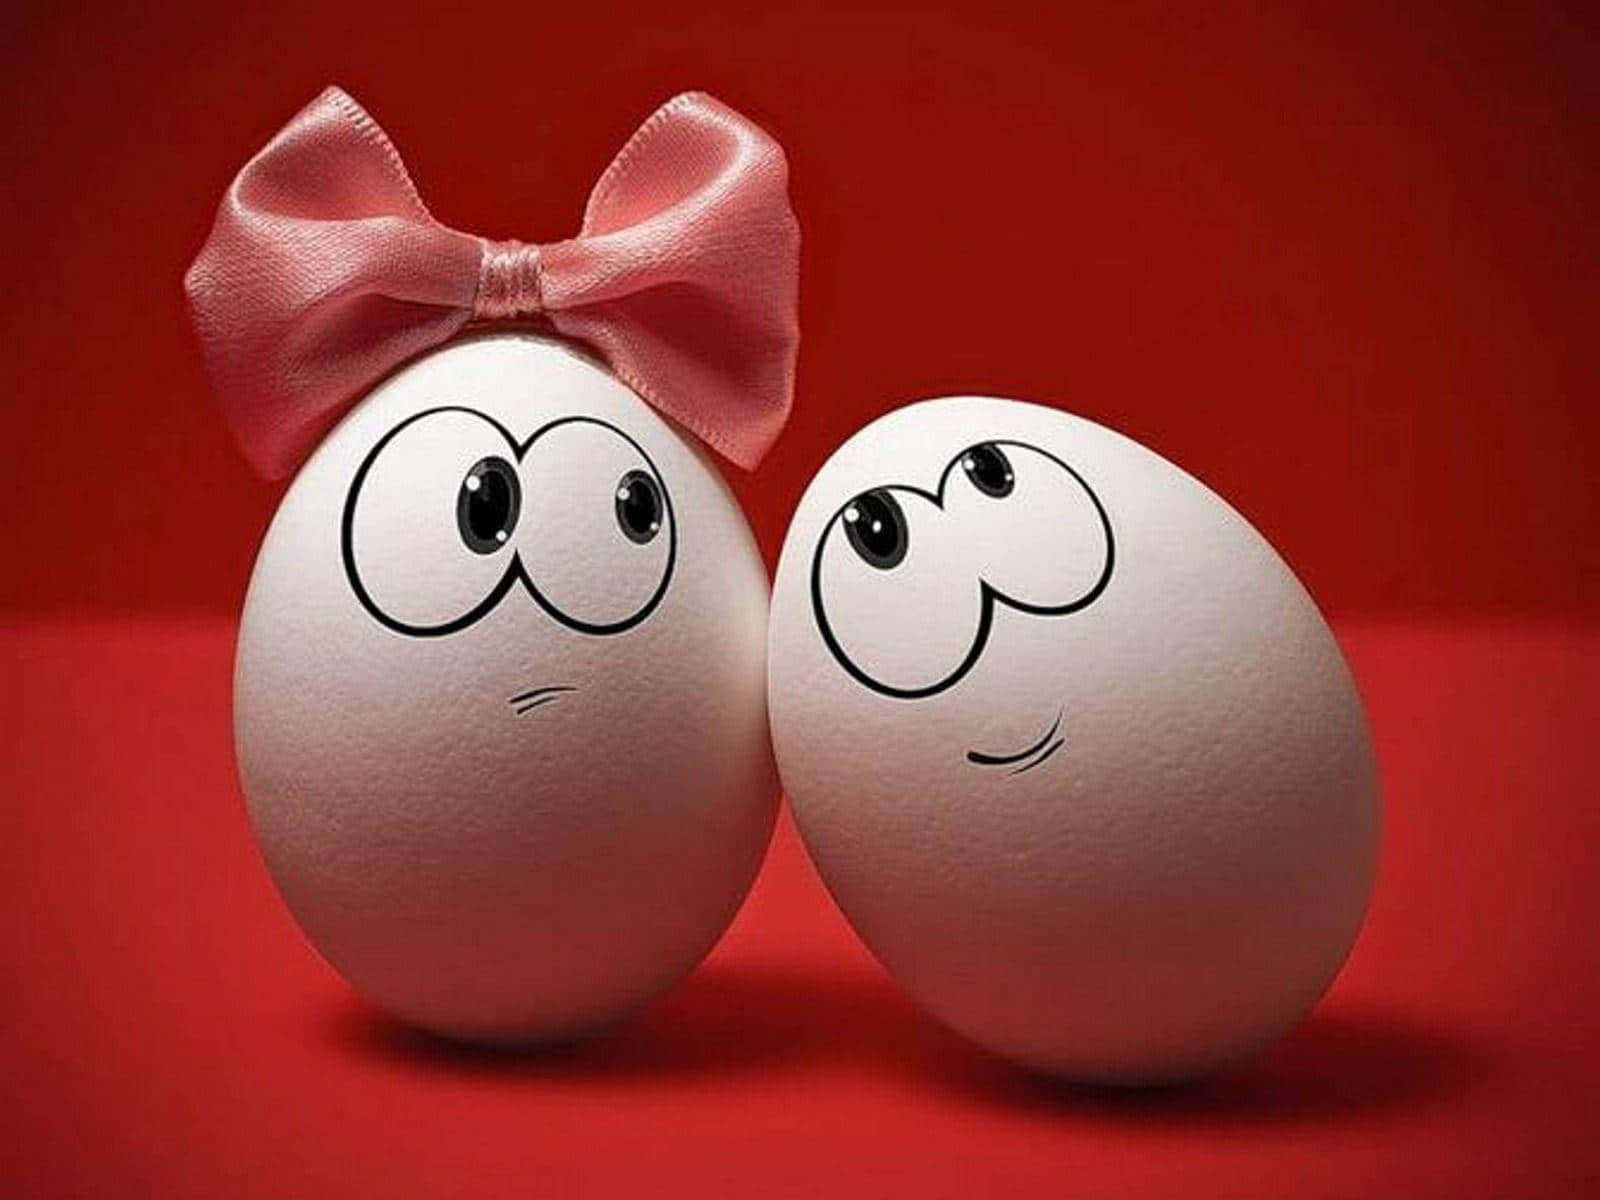 Two Eggs With A Bow On Them Background